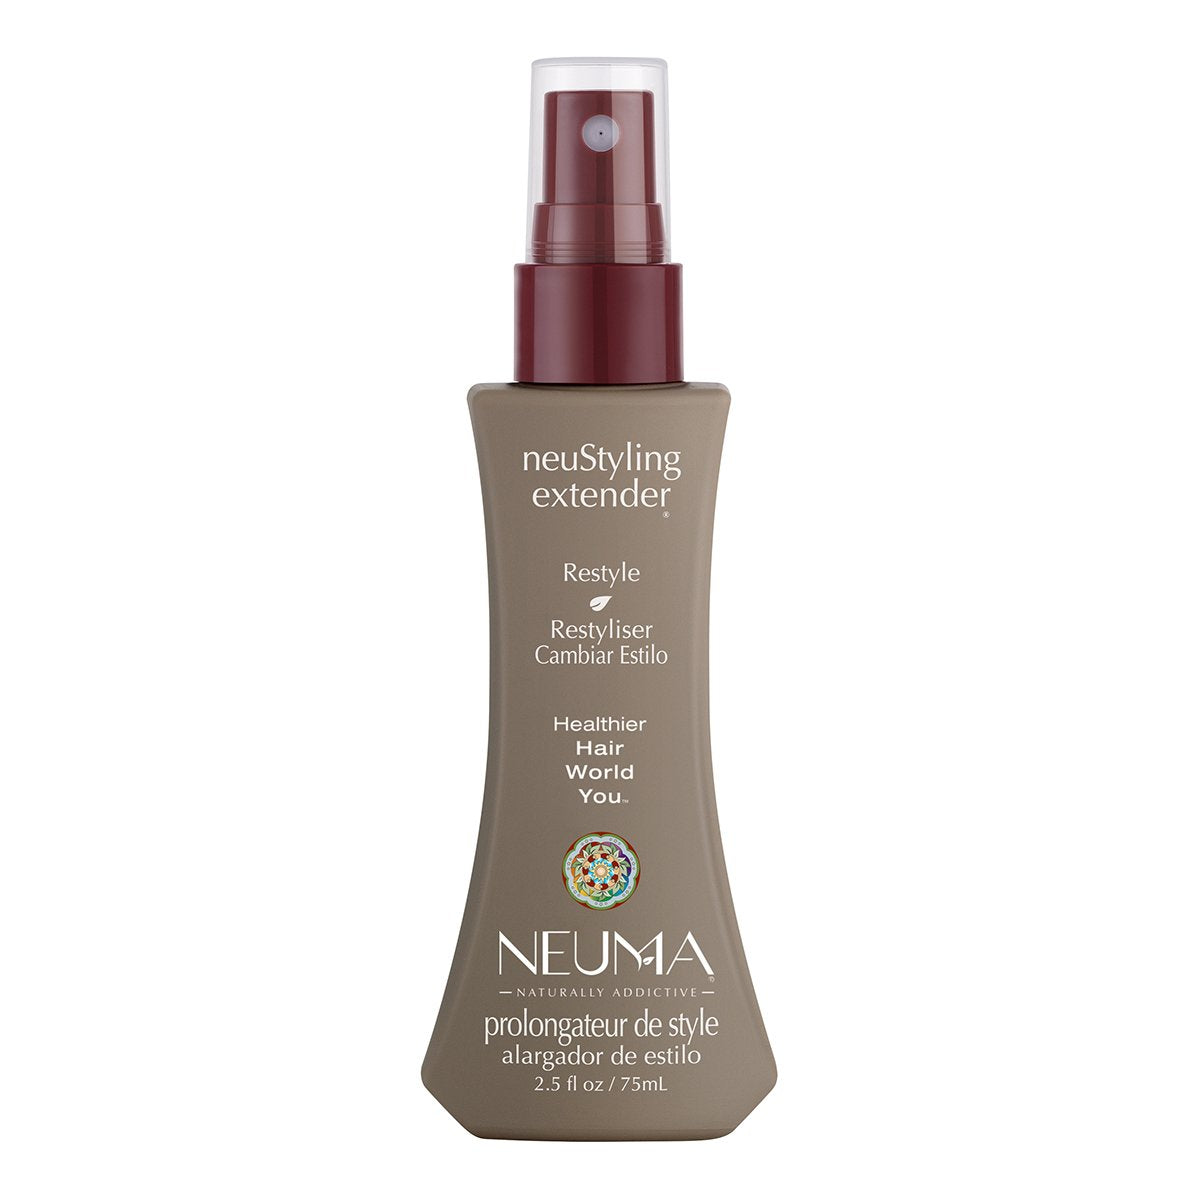 neuStyling extender - Cocoa Spa Boutique